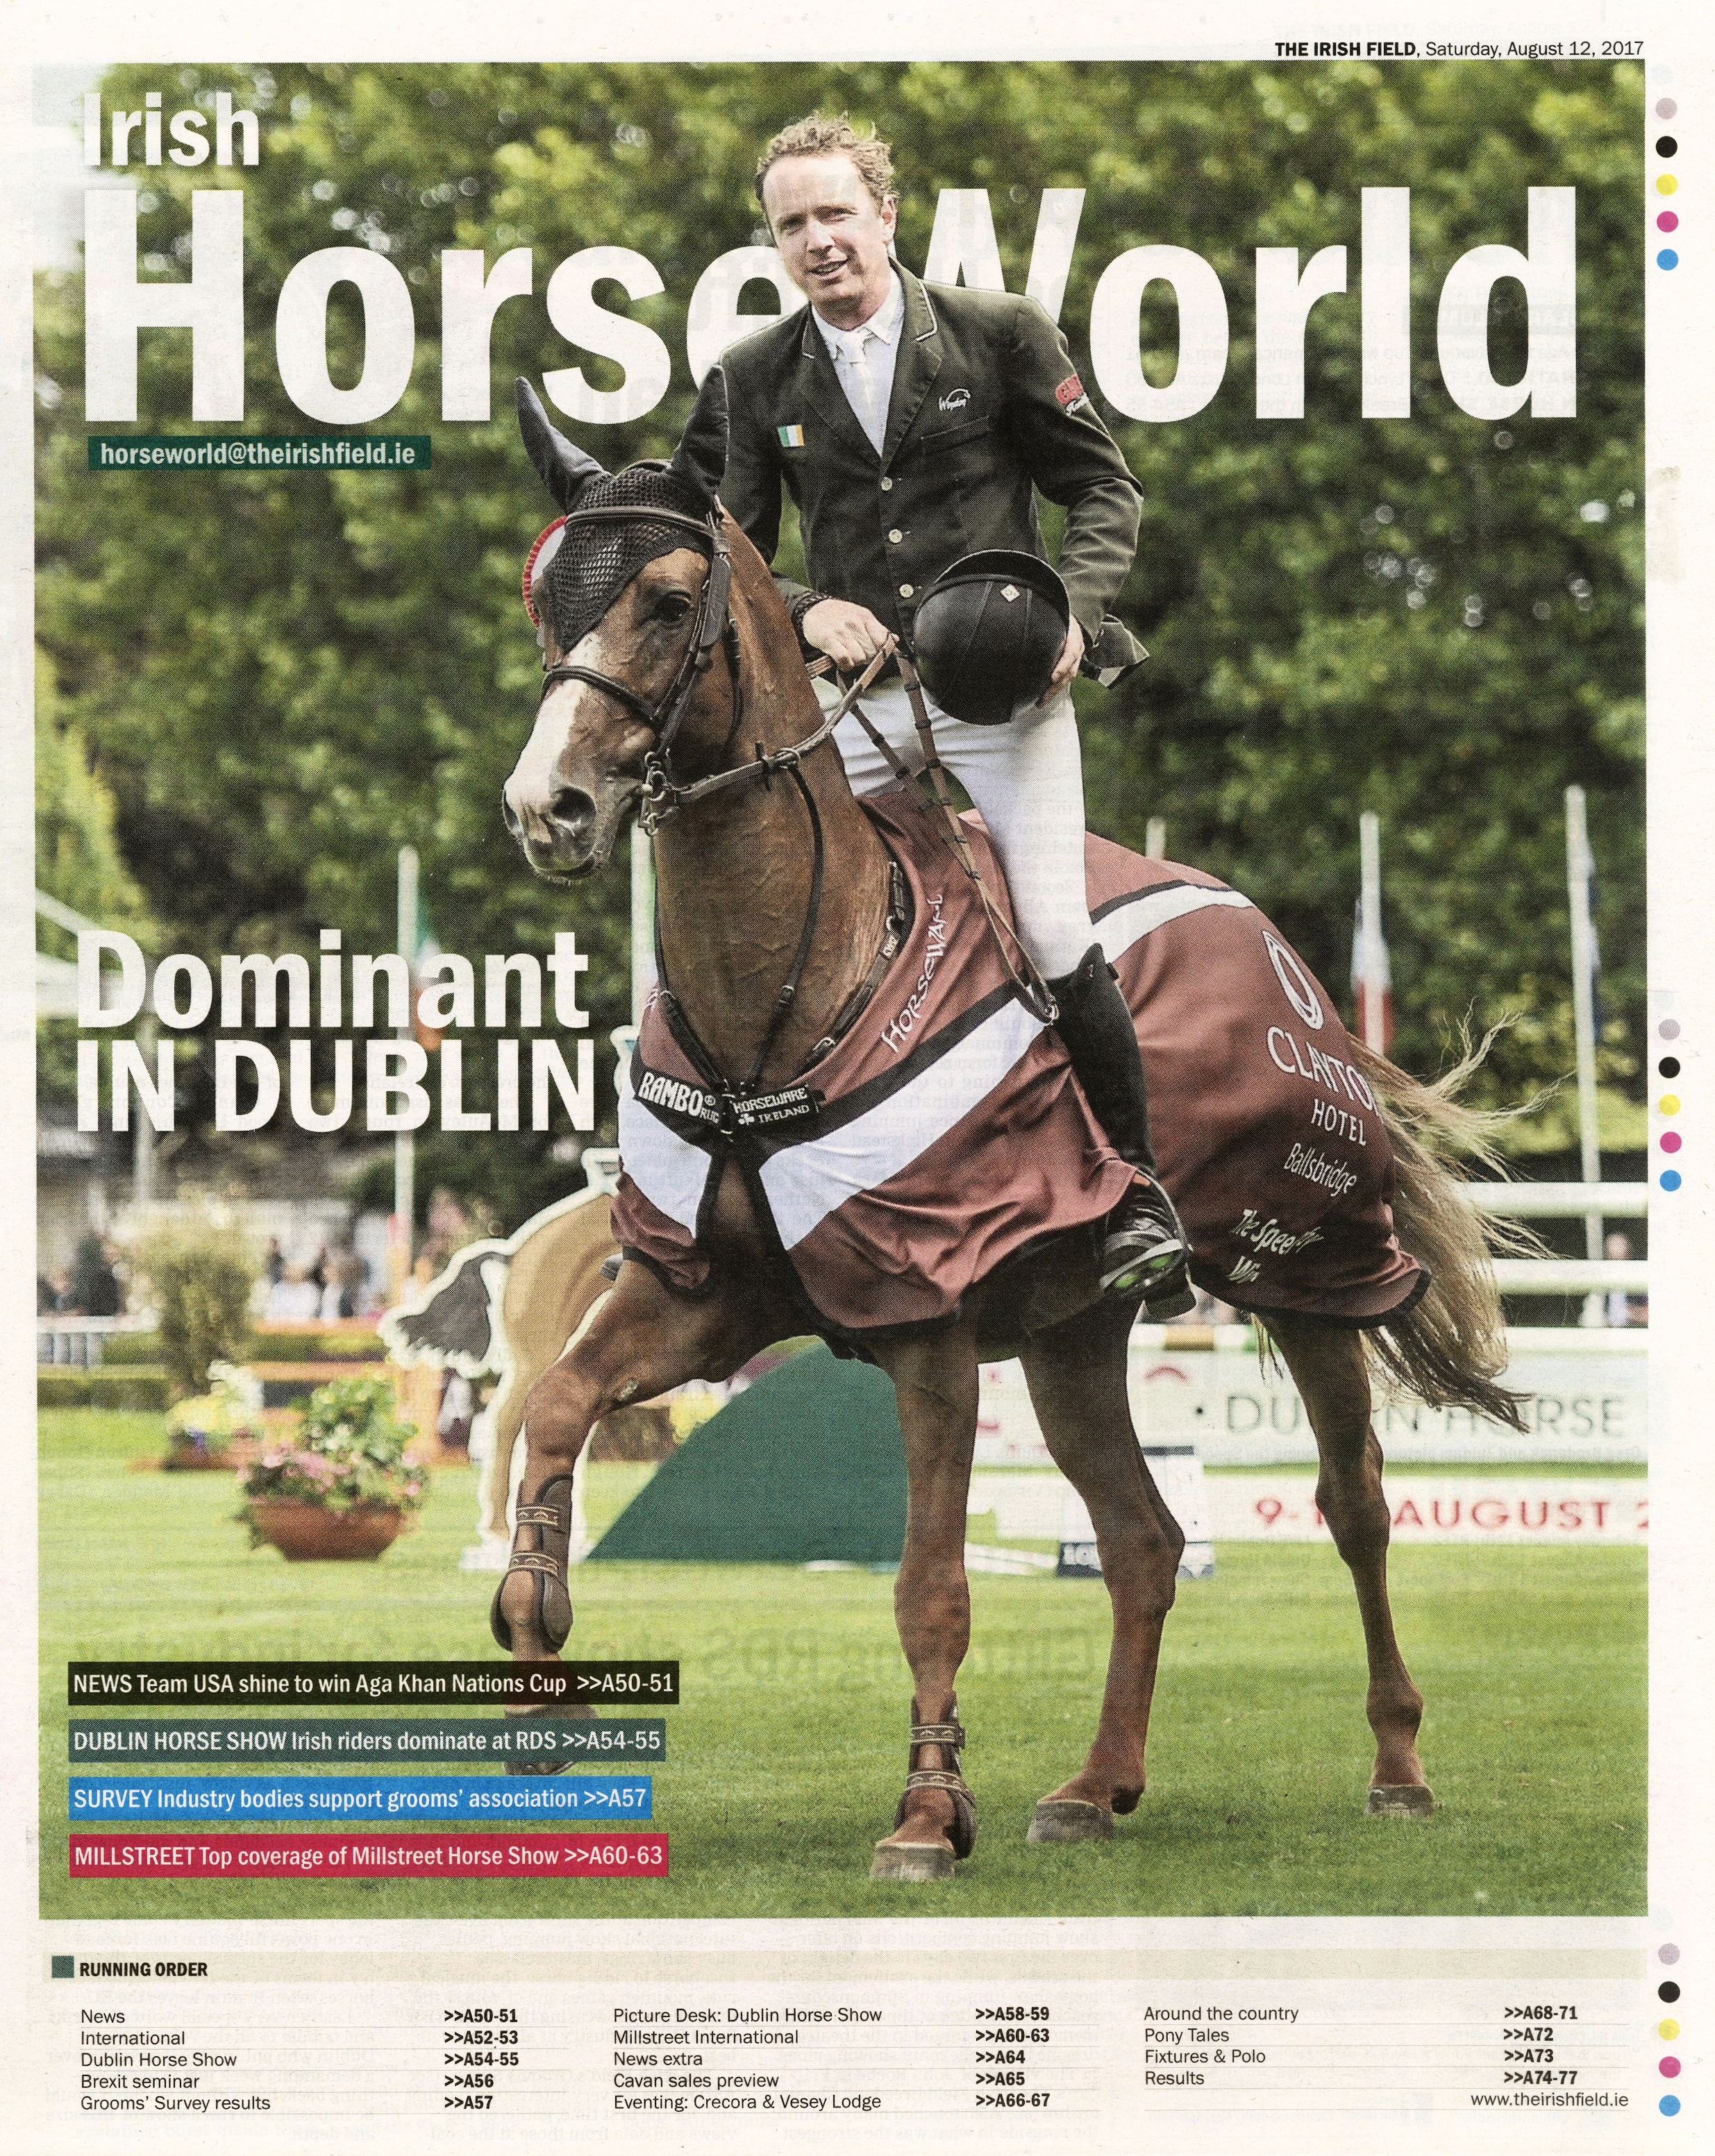  Greg Broderick of Ireland celebrates a win during the Dublin Horse Show    August 12 2017  The Irish Field  